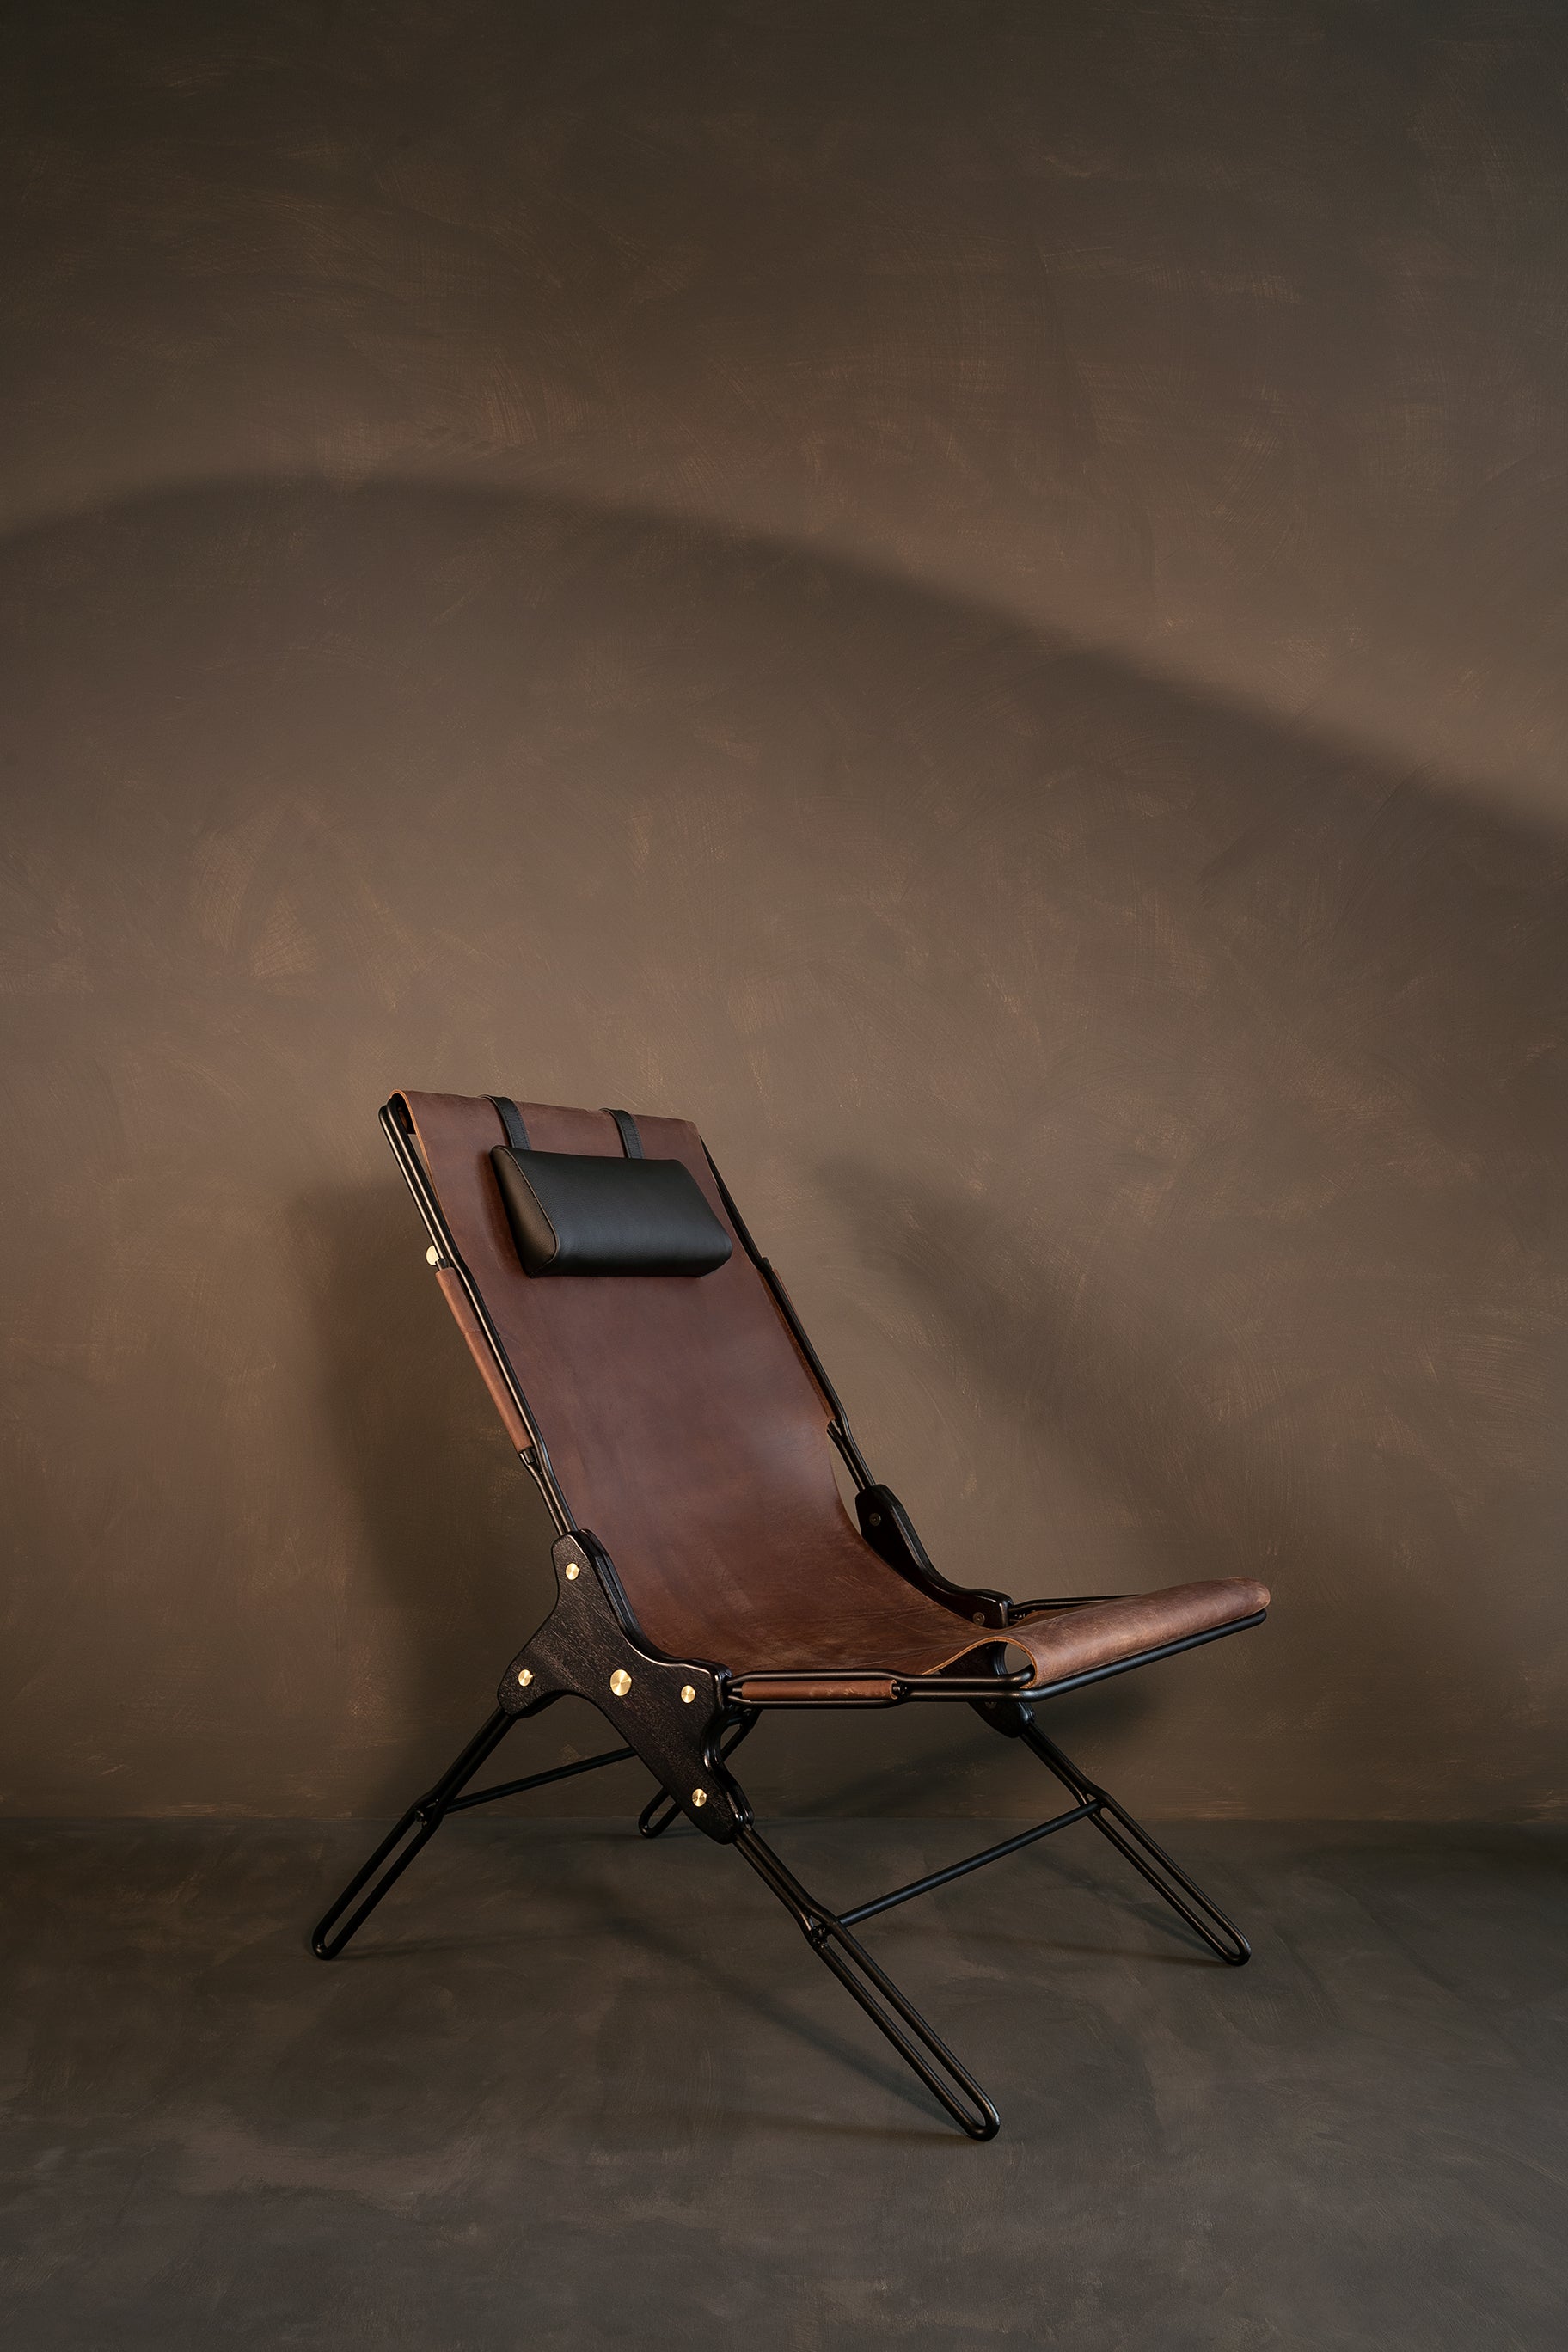 Brown lounge chair by Estudio Andean. 
Dimensions: W 56 x D 83 x H 93 cm
Materials: steel, bronze, wood, leather.

Lounge chair made of steel rod structure and solid colorado wood with a natural oil finish, Ecuadorian sustainable cowhide leather